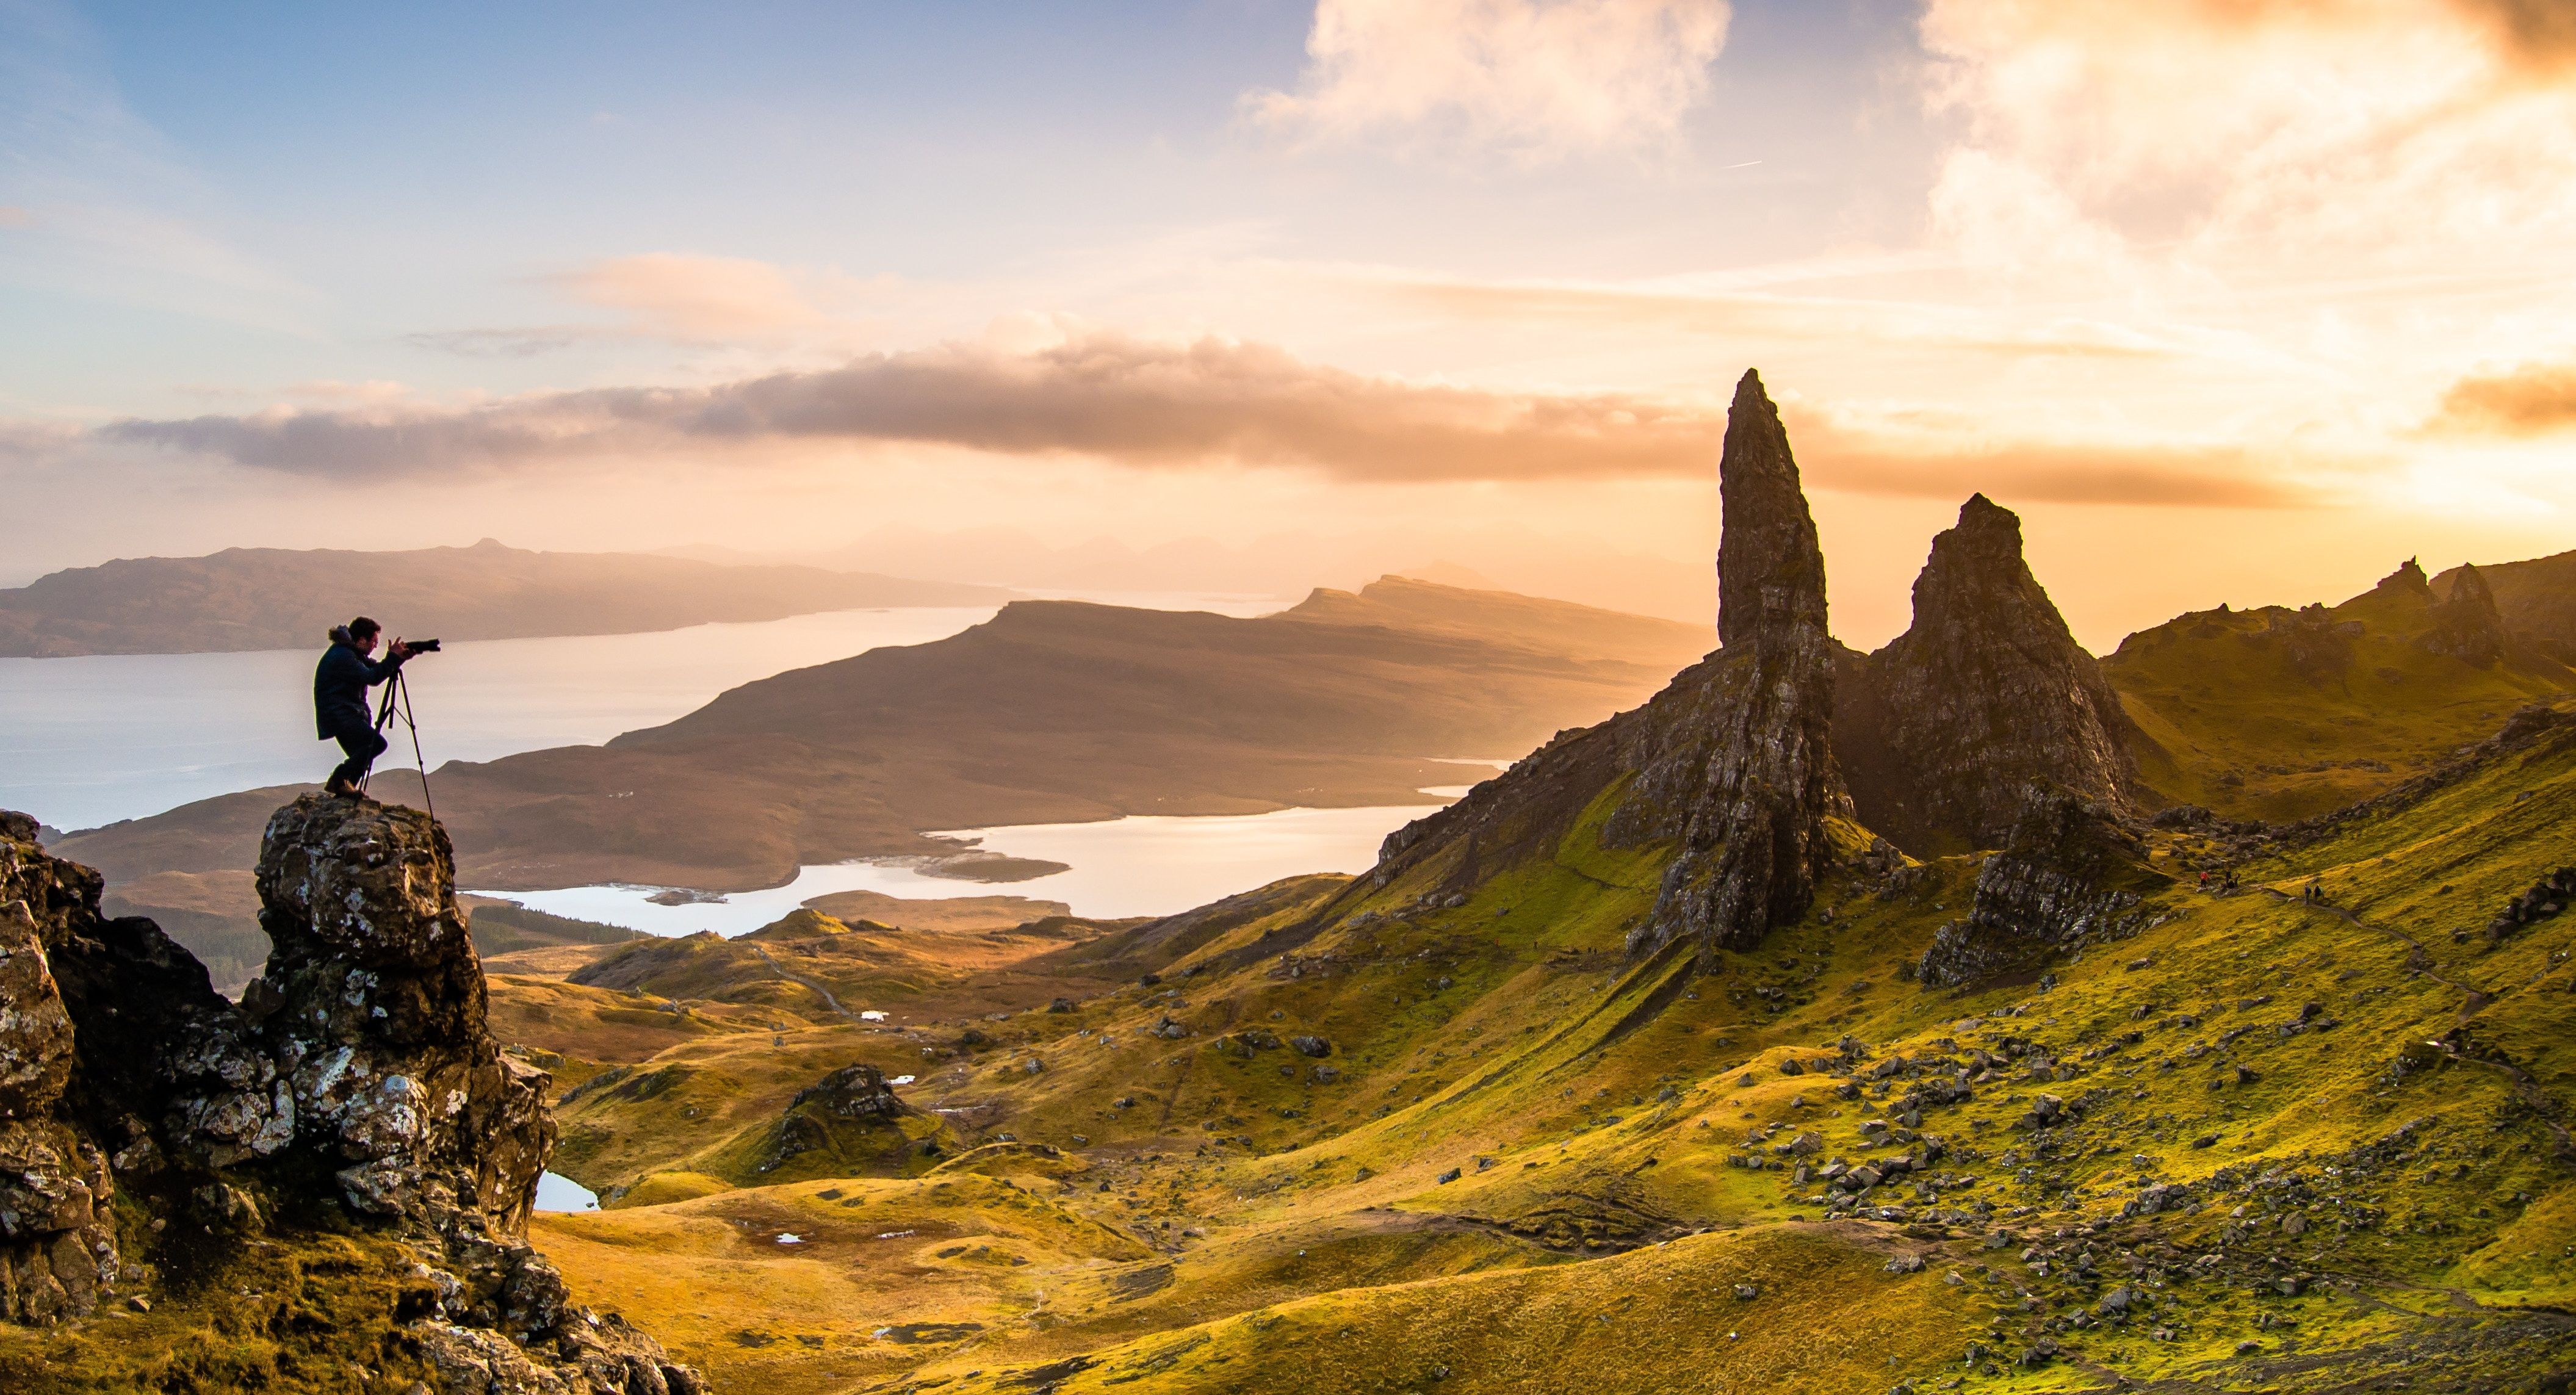 4221x2286 #outdoors, #nature, #scenery, #mountain range, #person, # wallpaper, #Public domain image, #cool background, #computer background, #old man of storr, #panoramic, #hd background, #landscape, #mountain, #sky, #background, #united